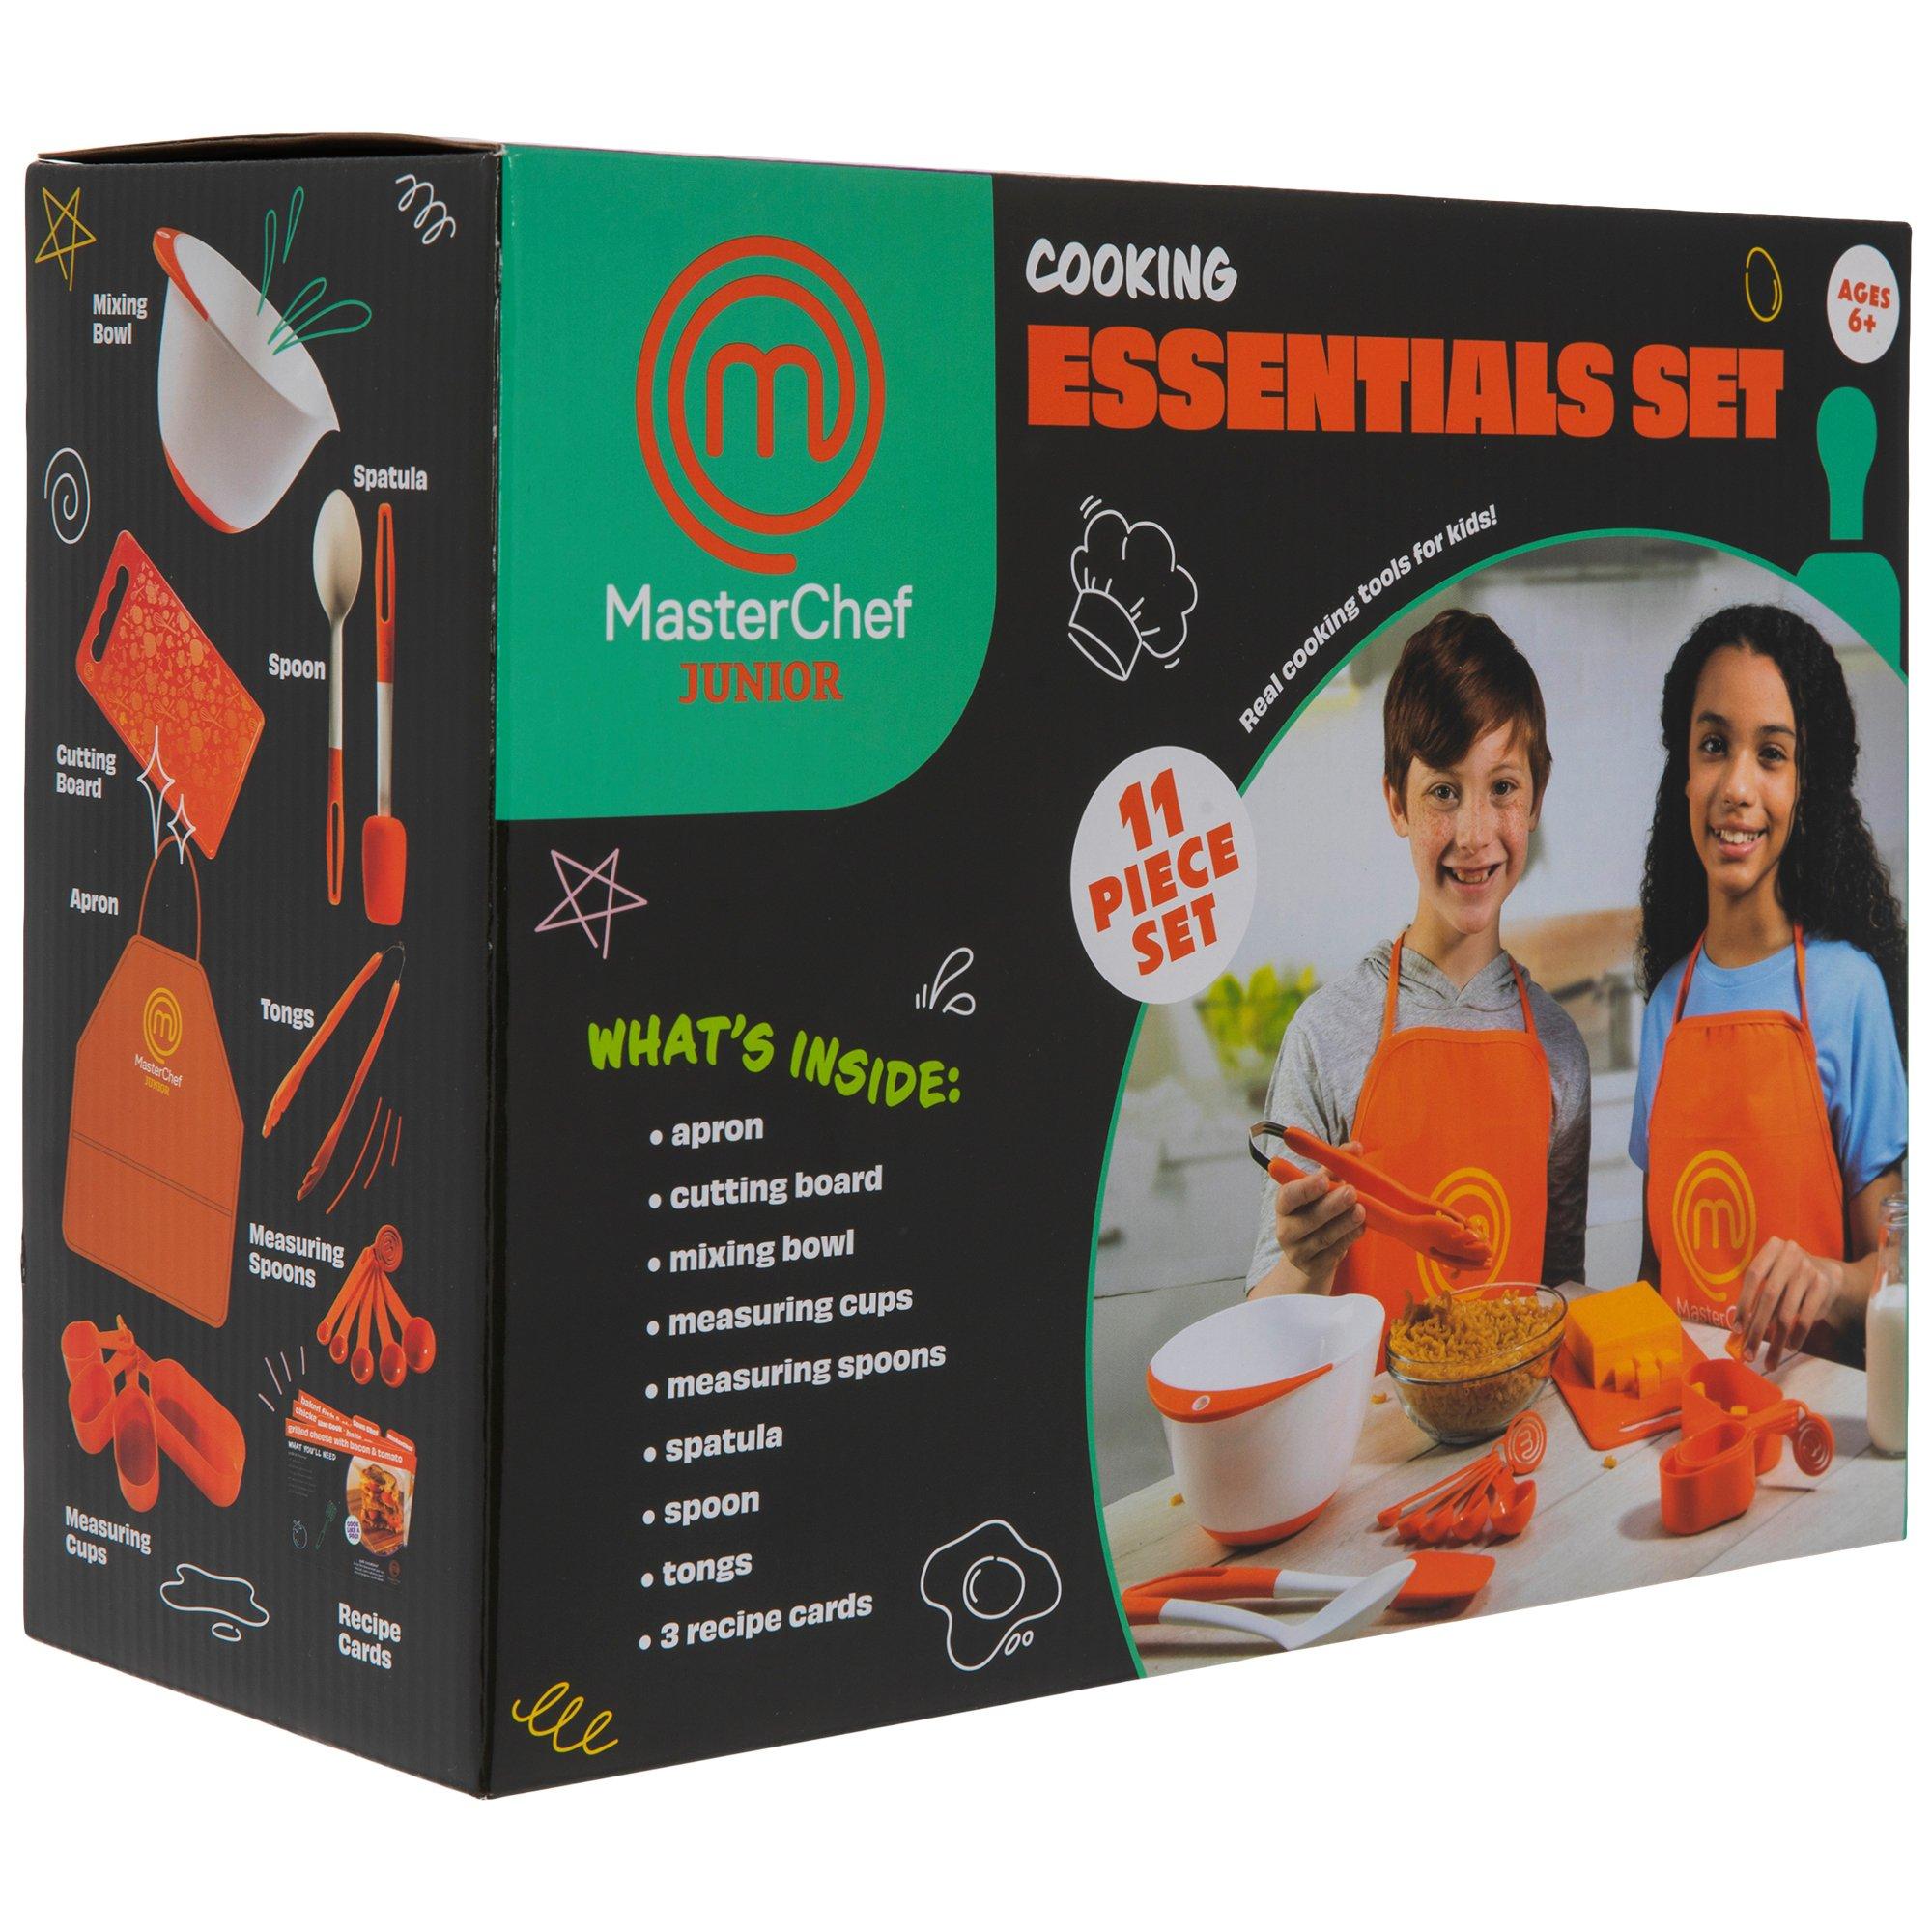 The Cooking Essentials Box